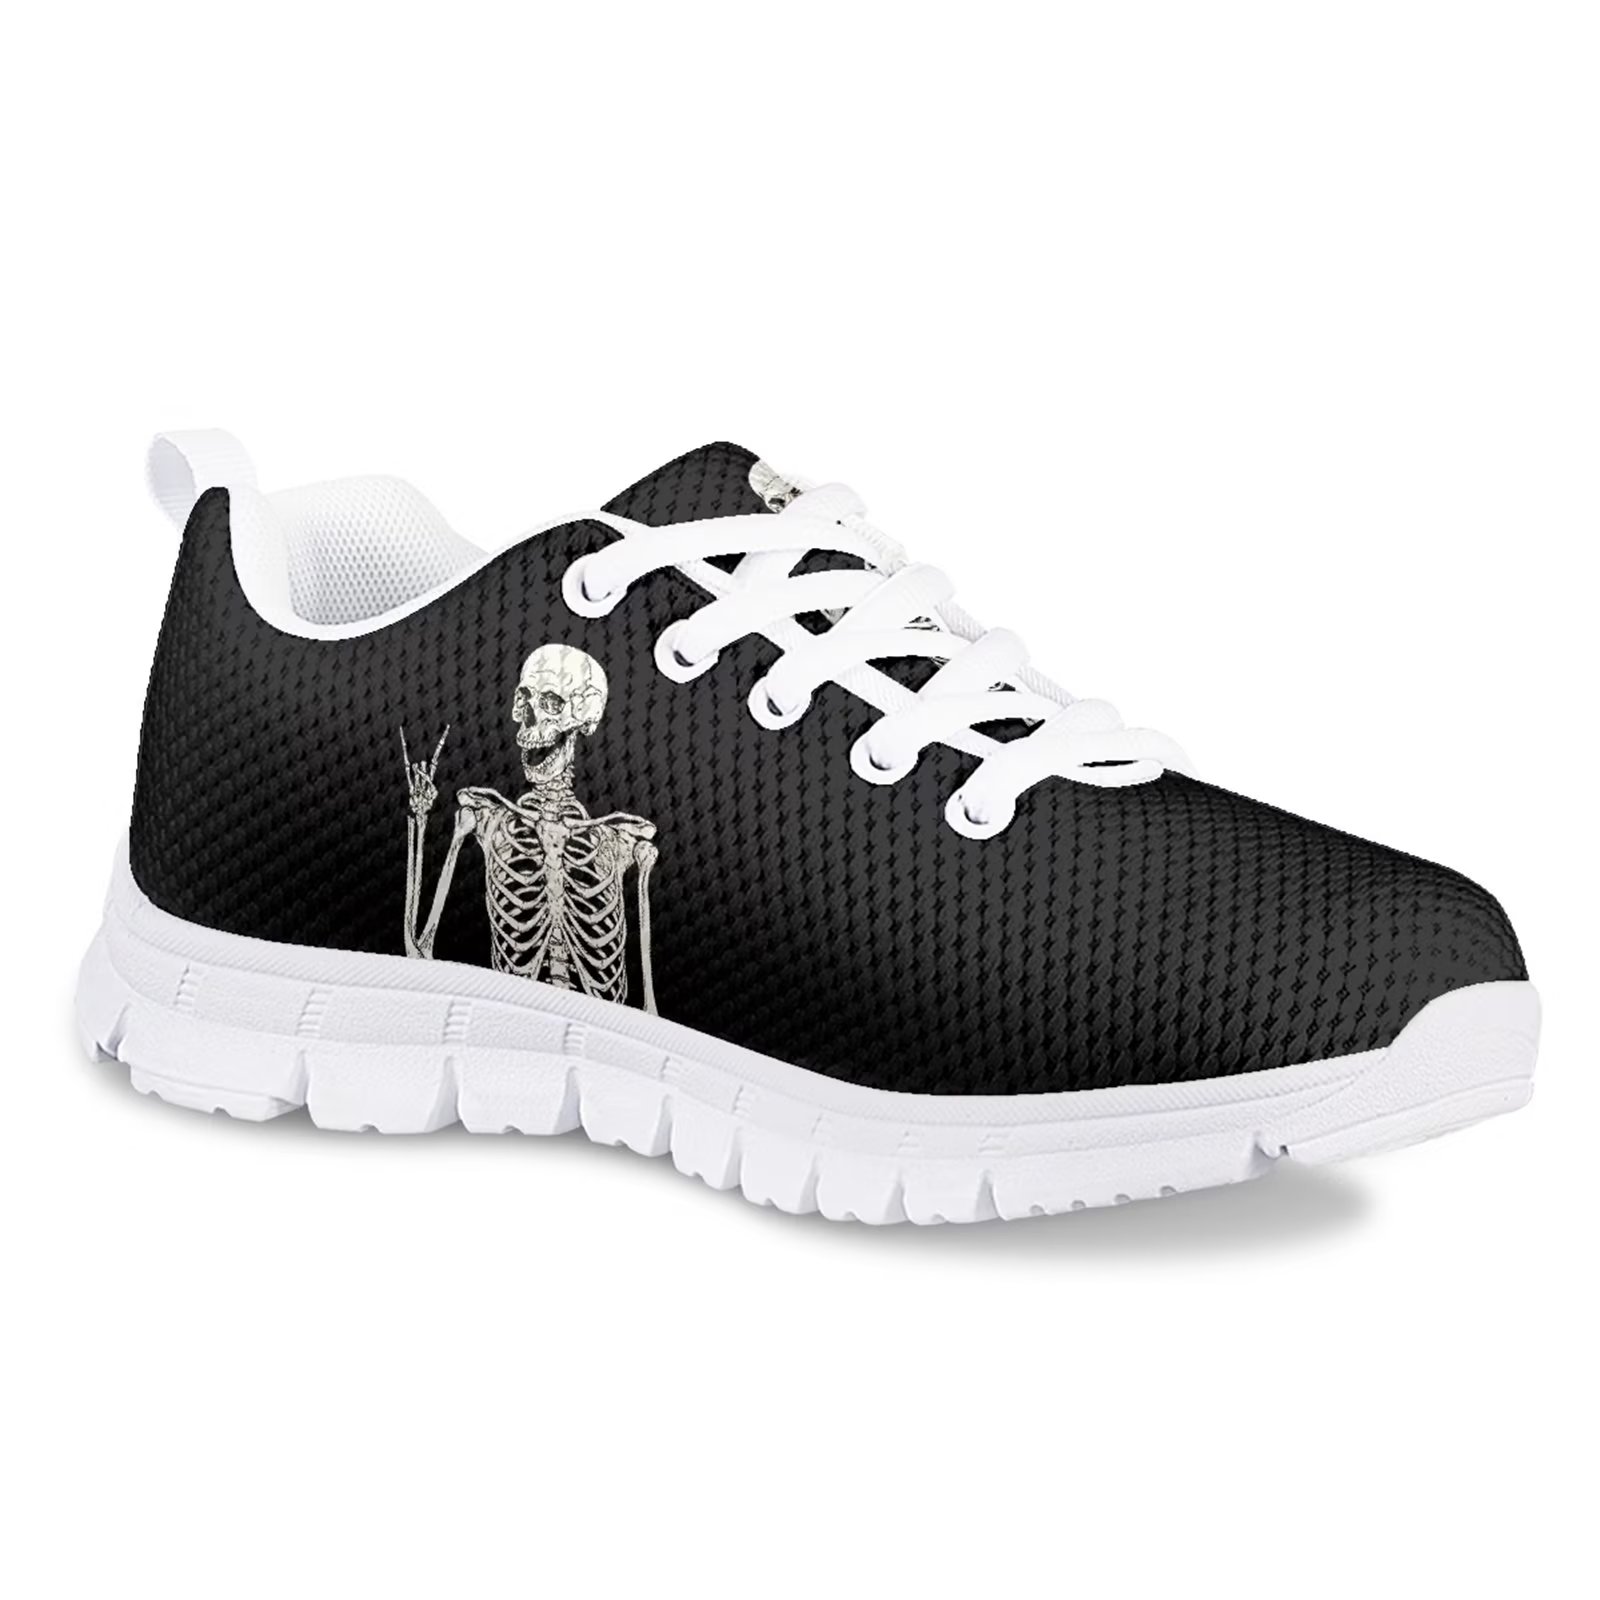 Pzuqiu Halloween Theme Skull Pattern Kids Tennis Shoes Ultralight Comfortable Child Running Shoes Halloween Gift for Kids Size 1 - image 2 of 7